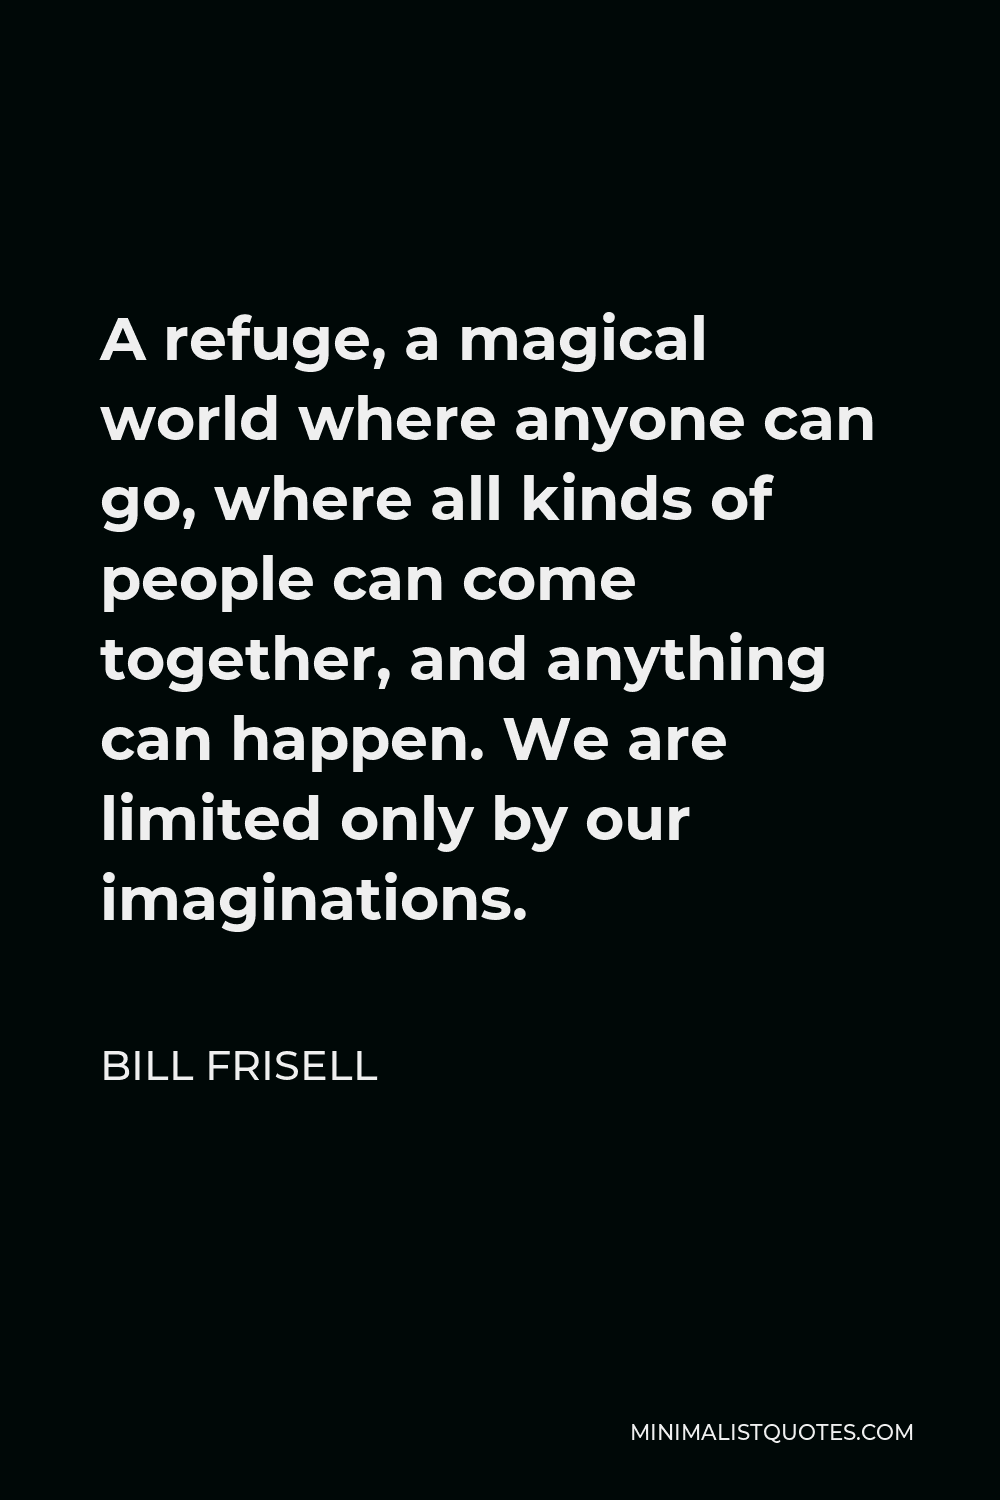 Bill Frisell Quote - A refuge, a magical world where anyone can go, where all kinds of people can come together, and anything can happen. We are limited only by our imaginations.